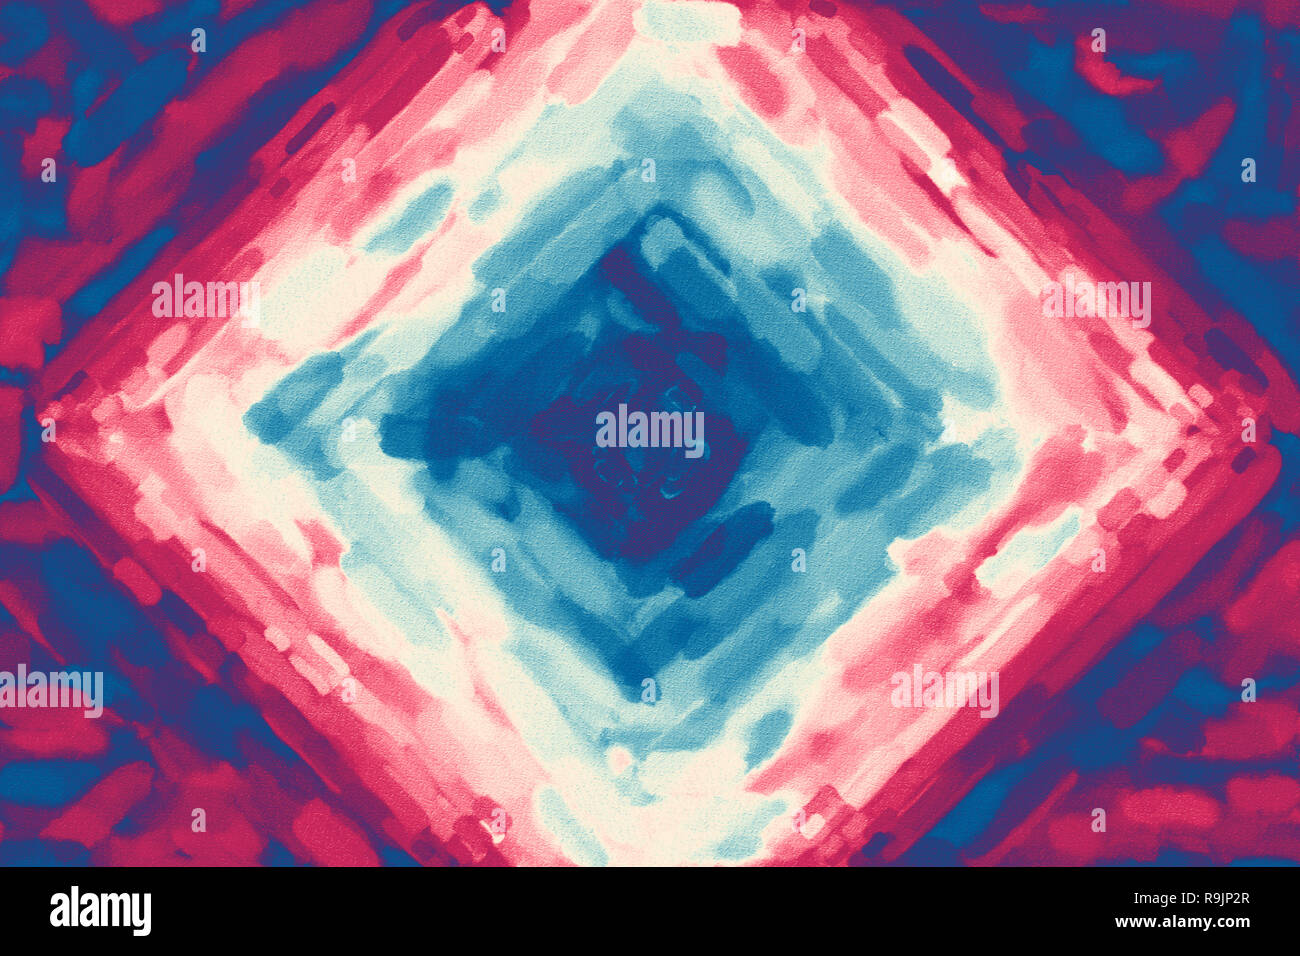 Blue white red diamond shaped watercolor gradient background. Colorful digital illustration simulating true watercolor with paper texture. Stock Photo